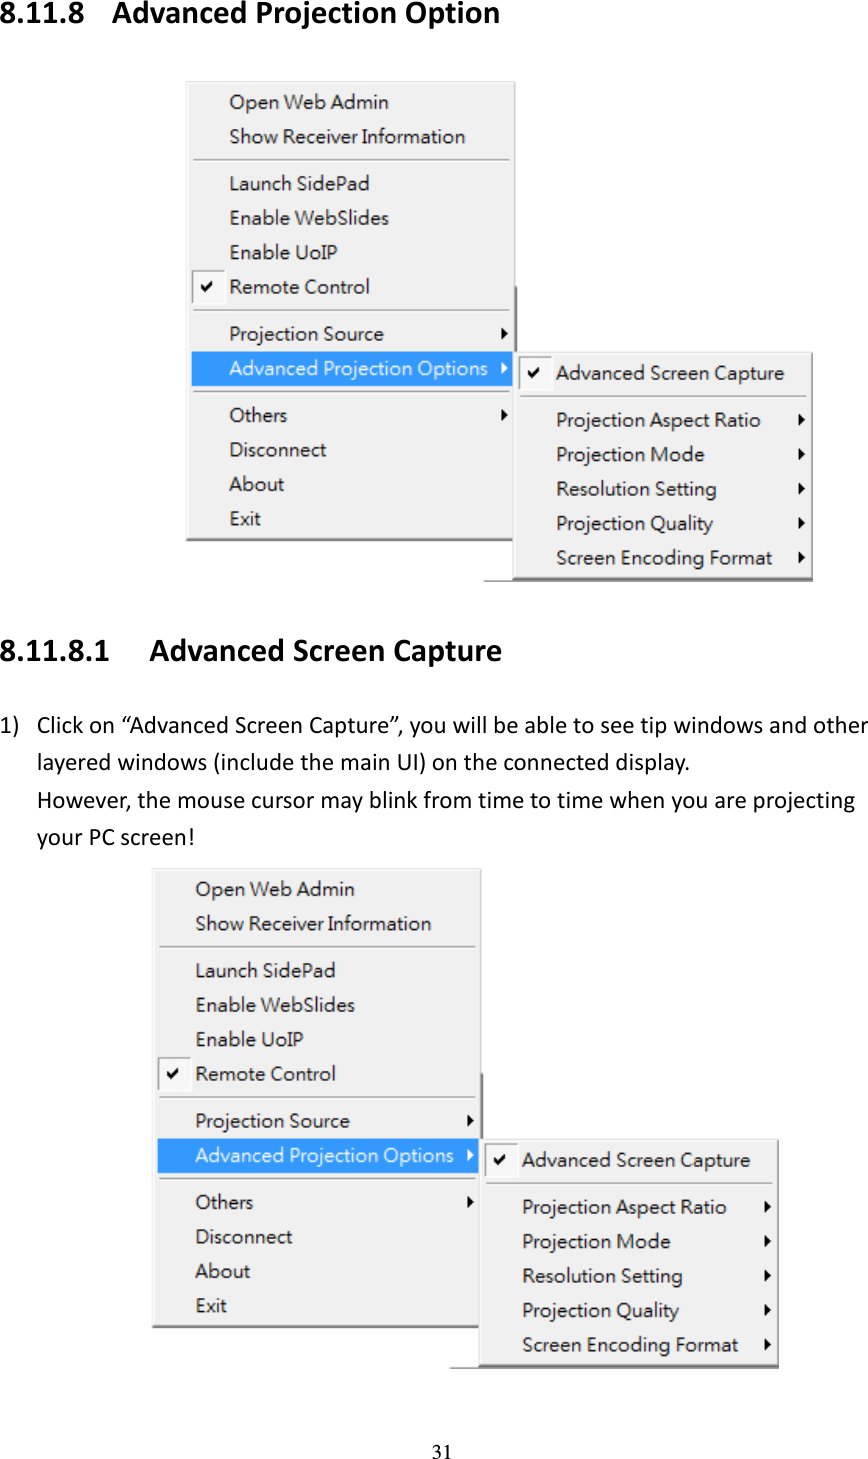   31 8.11.8 Advanced Projection Option  8.11.8.1 Advanced Screen Capture 1) Click on “Advanced Screen Capture”, you will be able to see tip windows and other layered windows (include the main UI) on the connected display. However, the mouse cursor may blink from time to time when you are projecting your PC screen!     